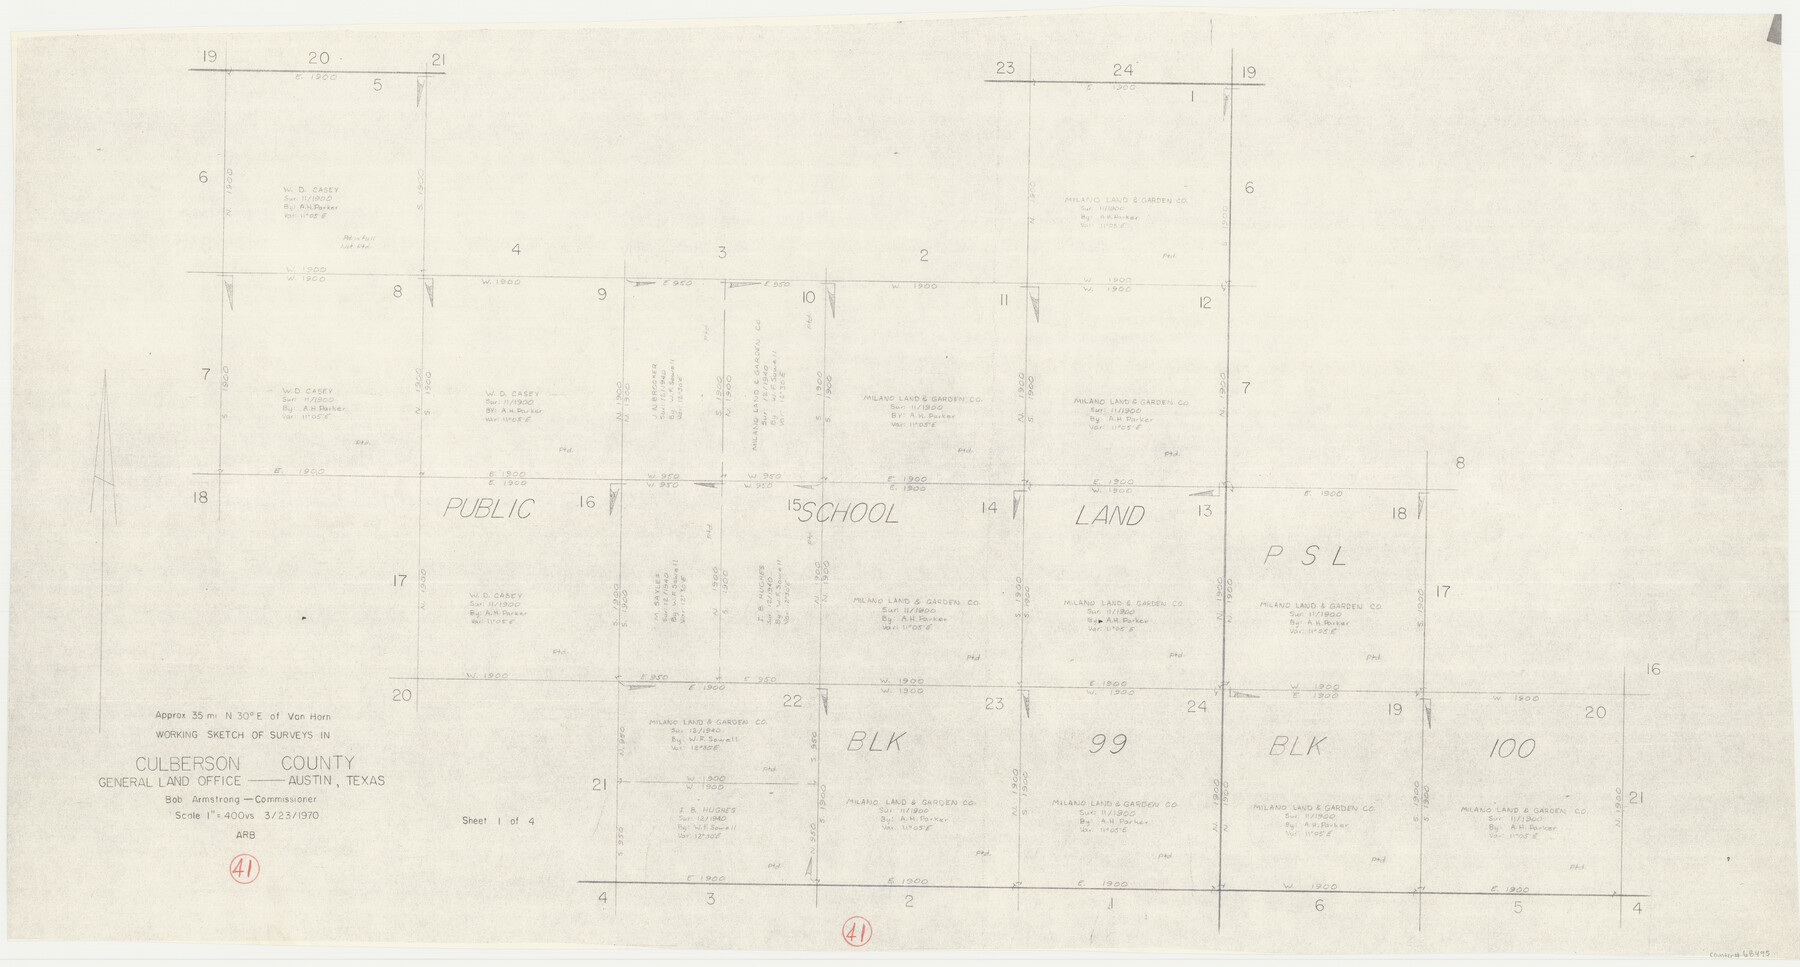 68495, Culberson County Working Sketch 41, General Map Collection